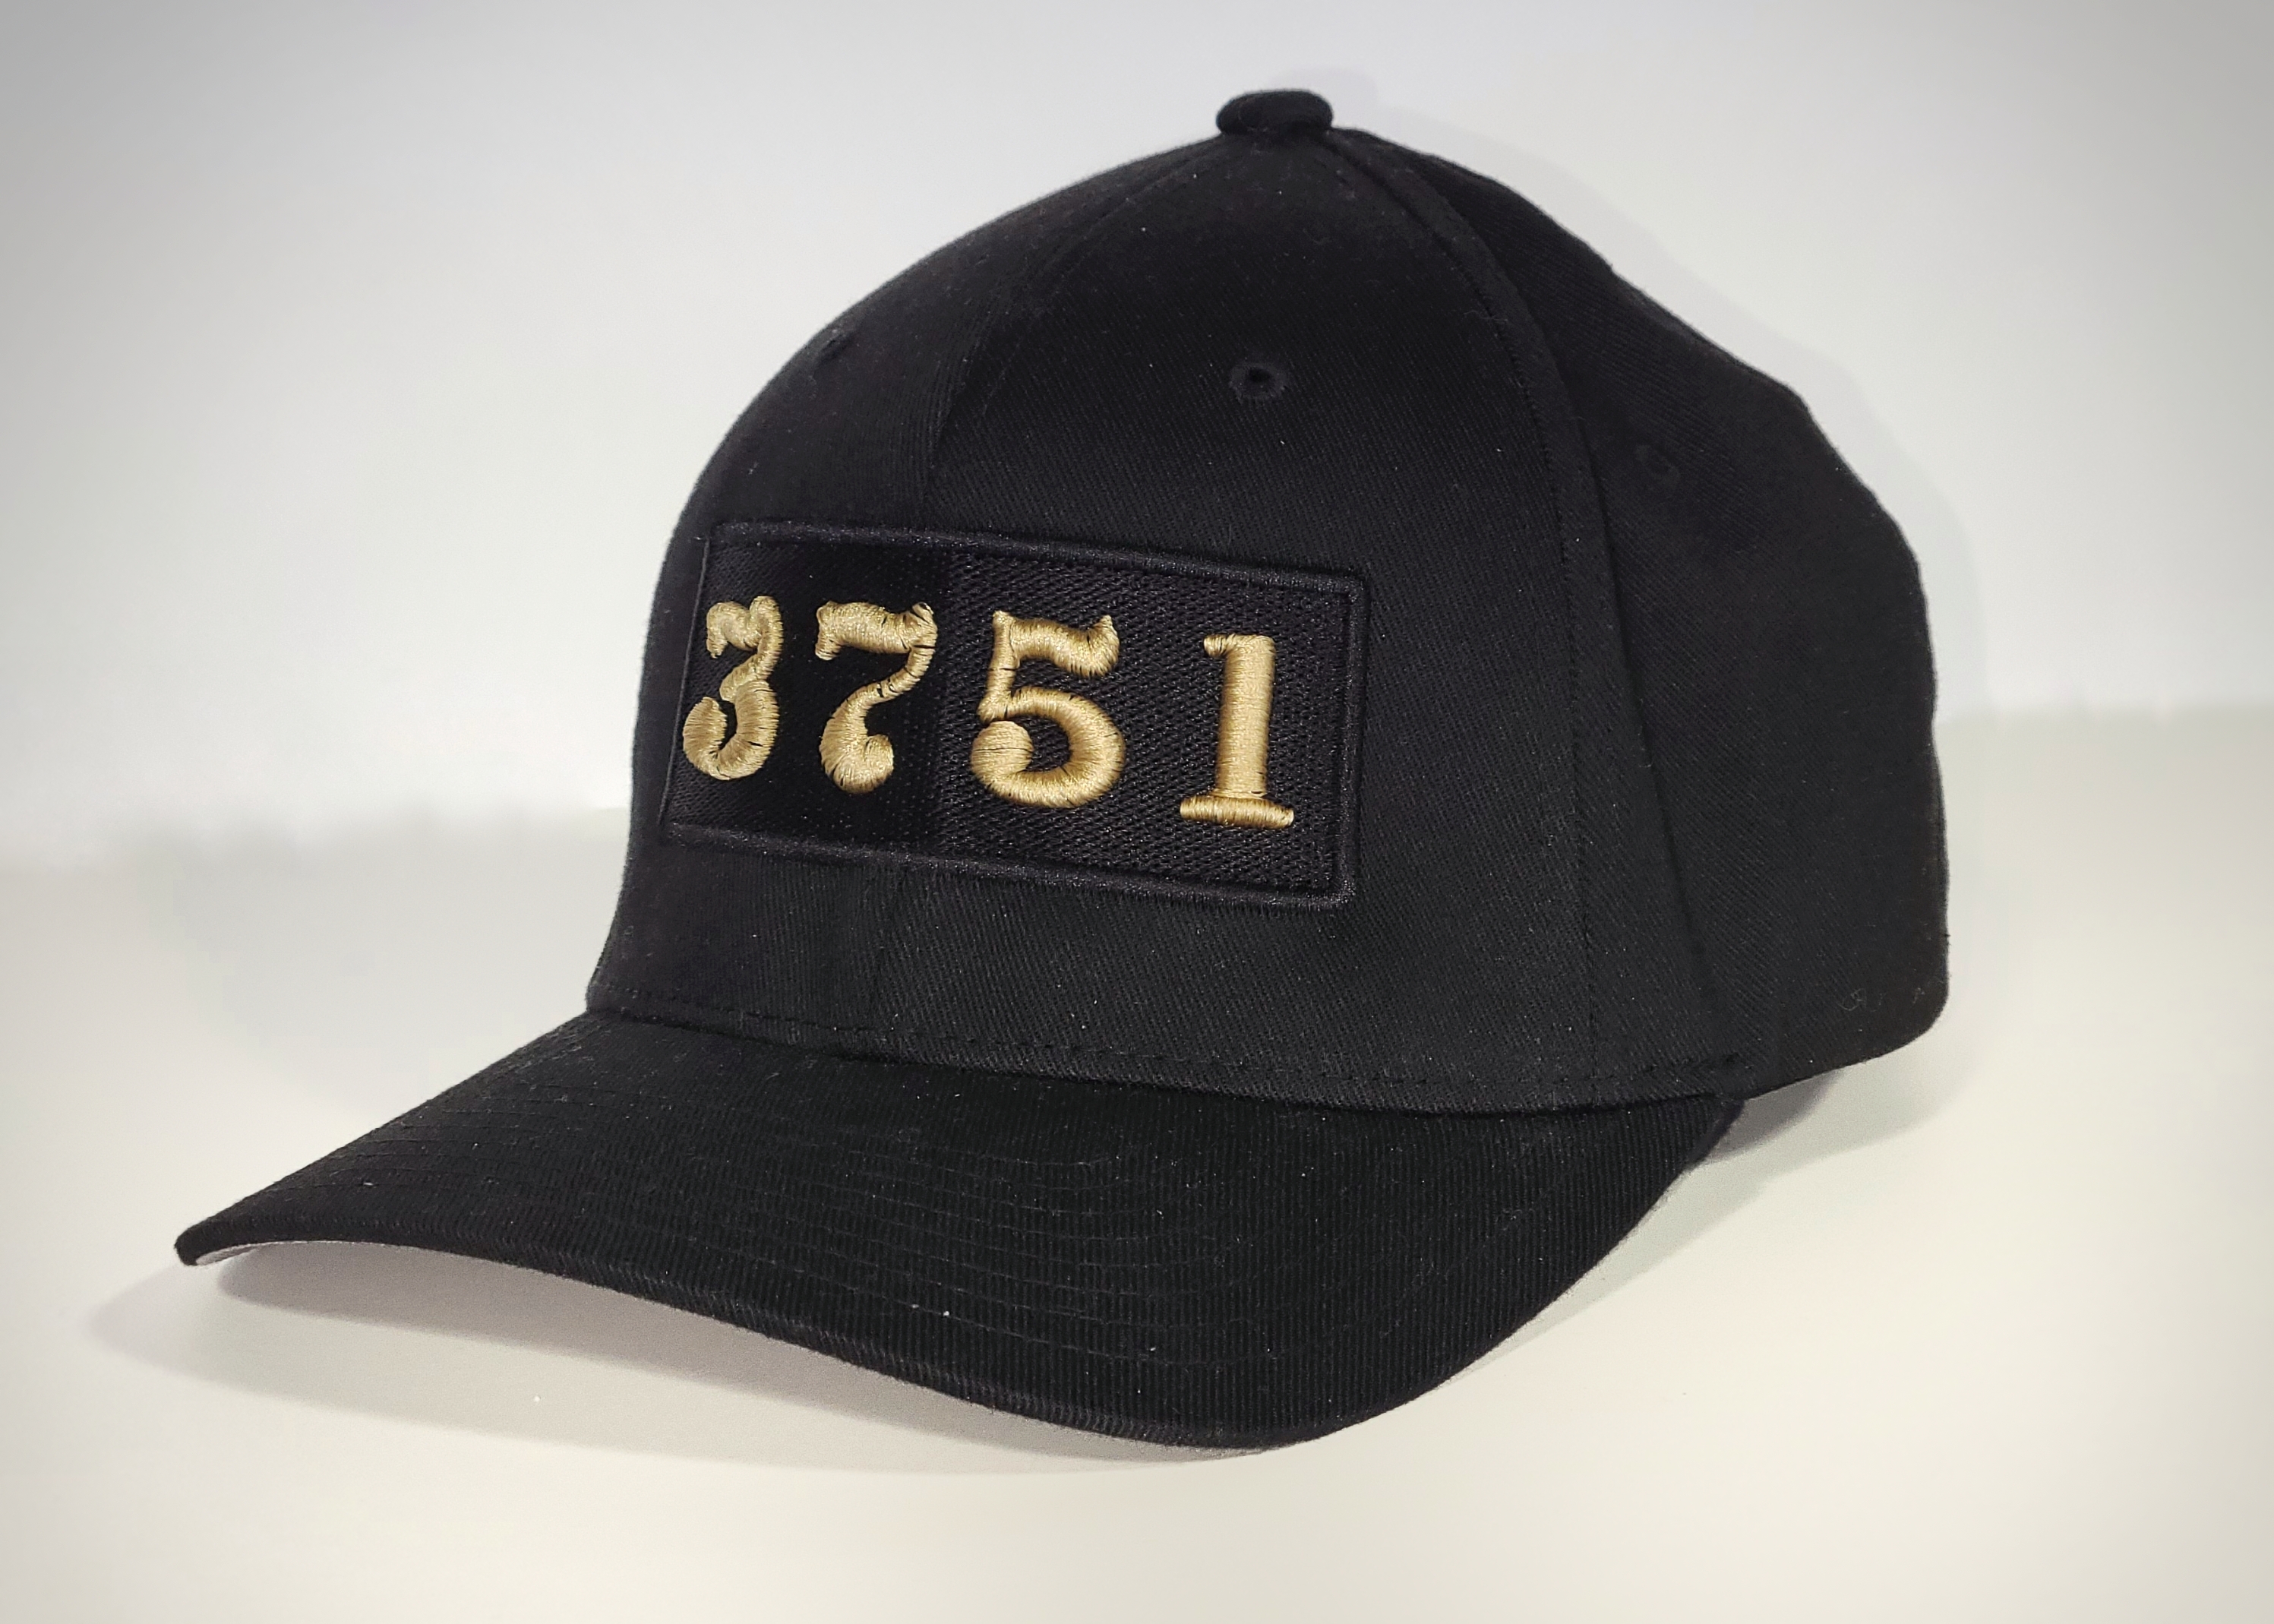 NEW!!! "3751" 3D Embroidered Number Plate